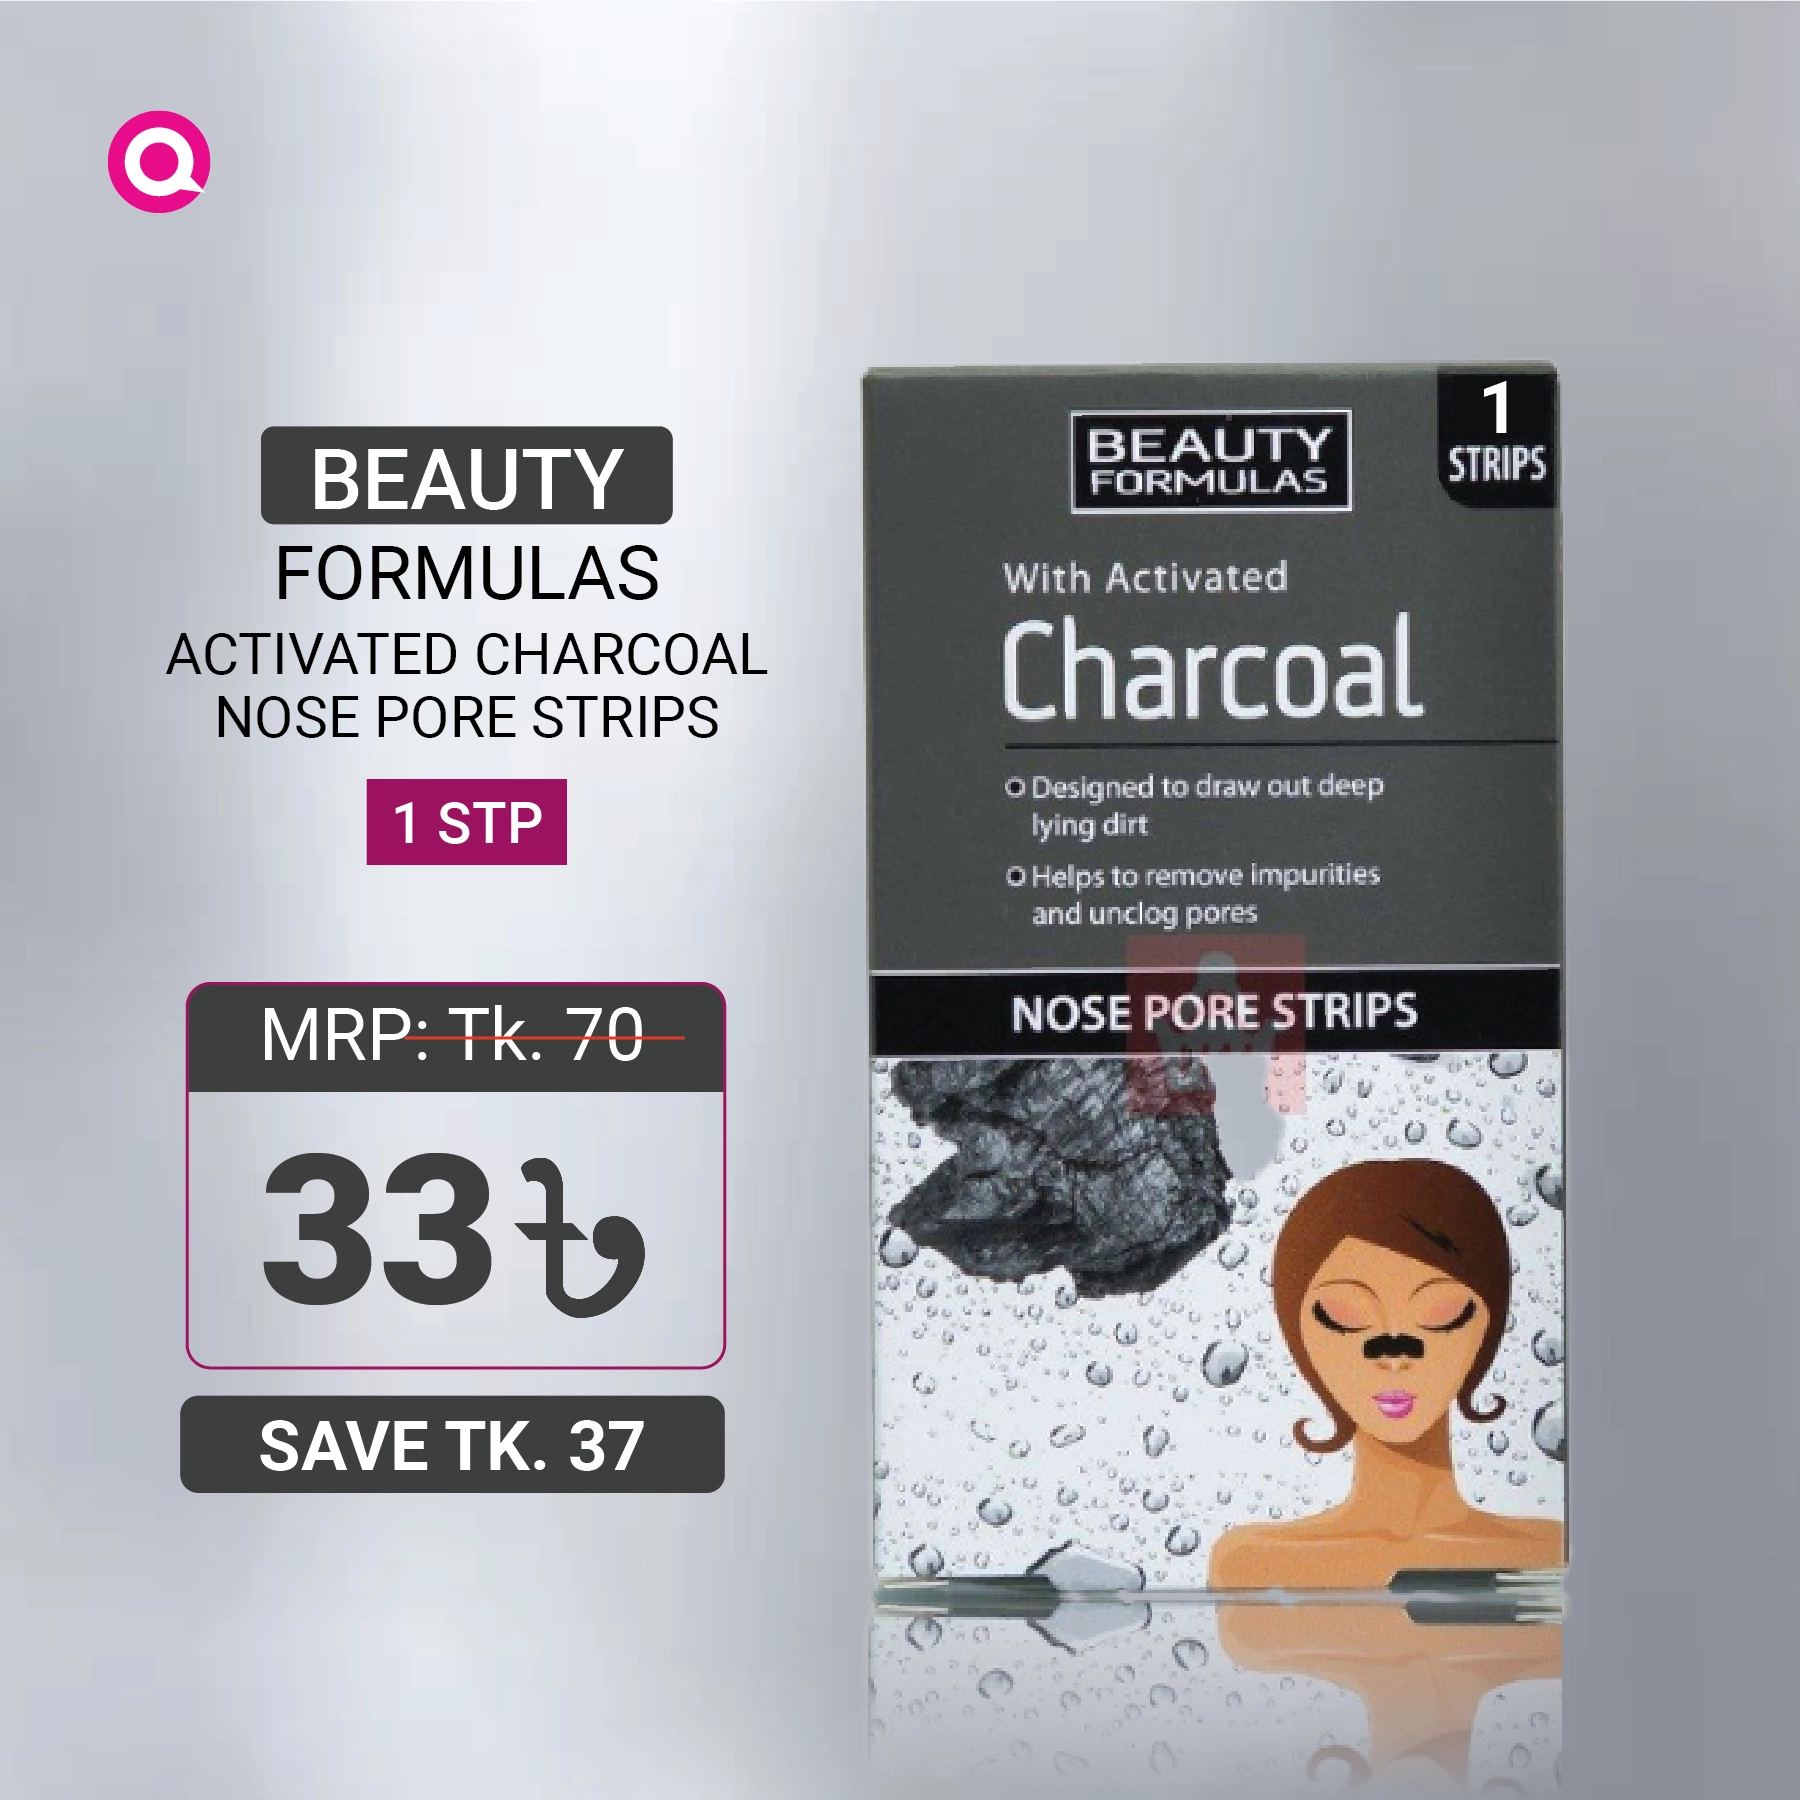 BEAUTY FORMULAS ACTIVATED CHARCOAL NOSE PORE STRIPS-01